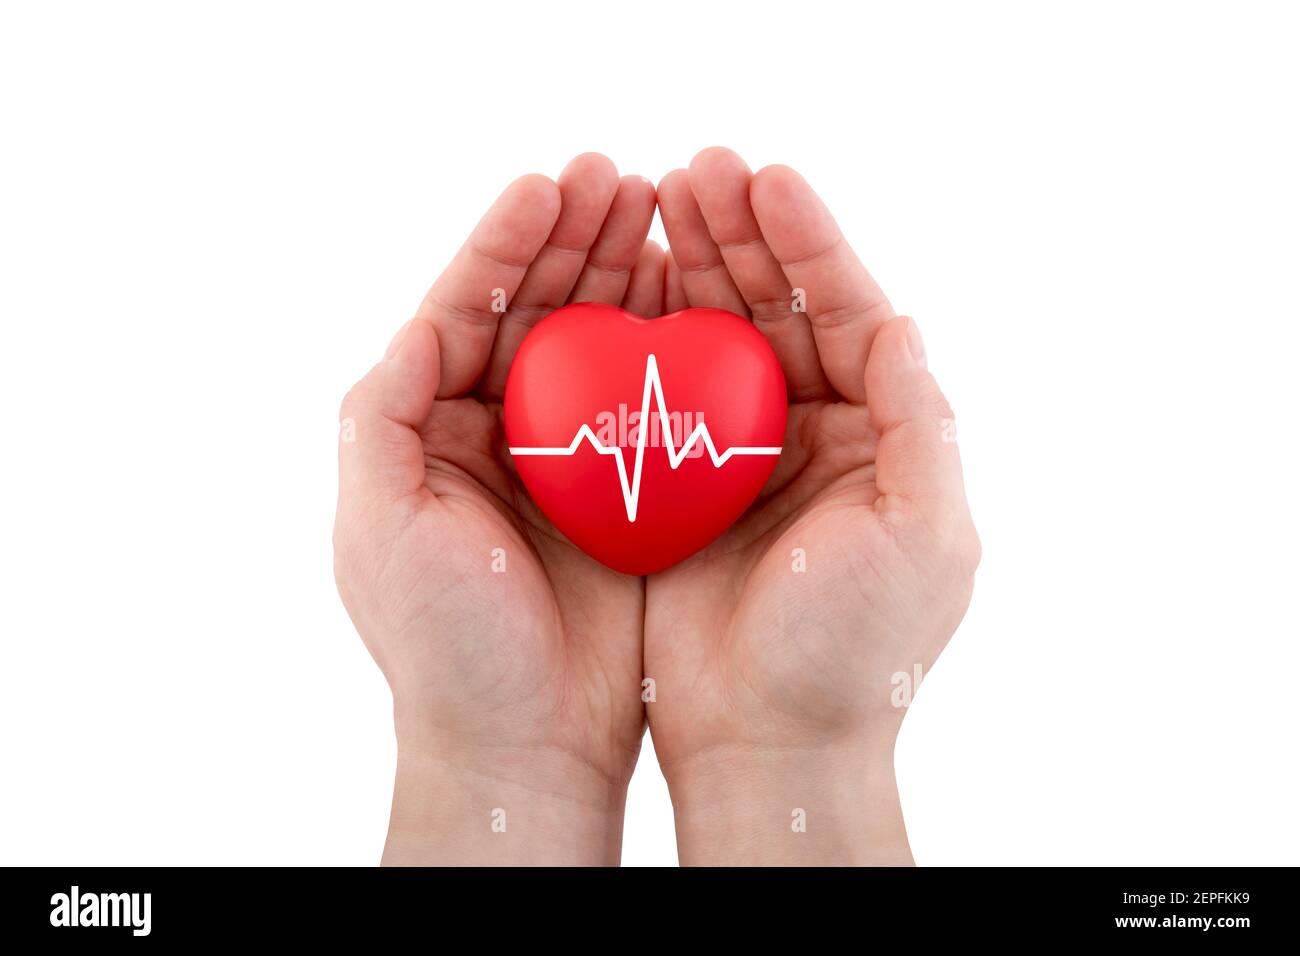 Red heart with pulse in hands isolated on white background with clipping path Stock Photo